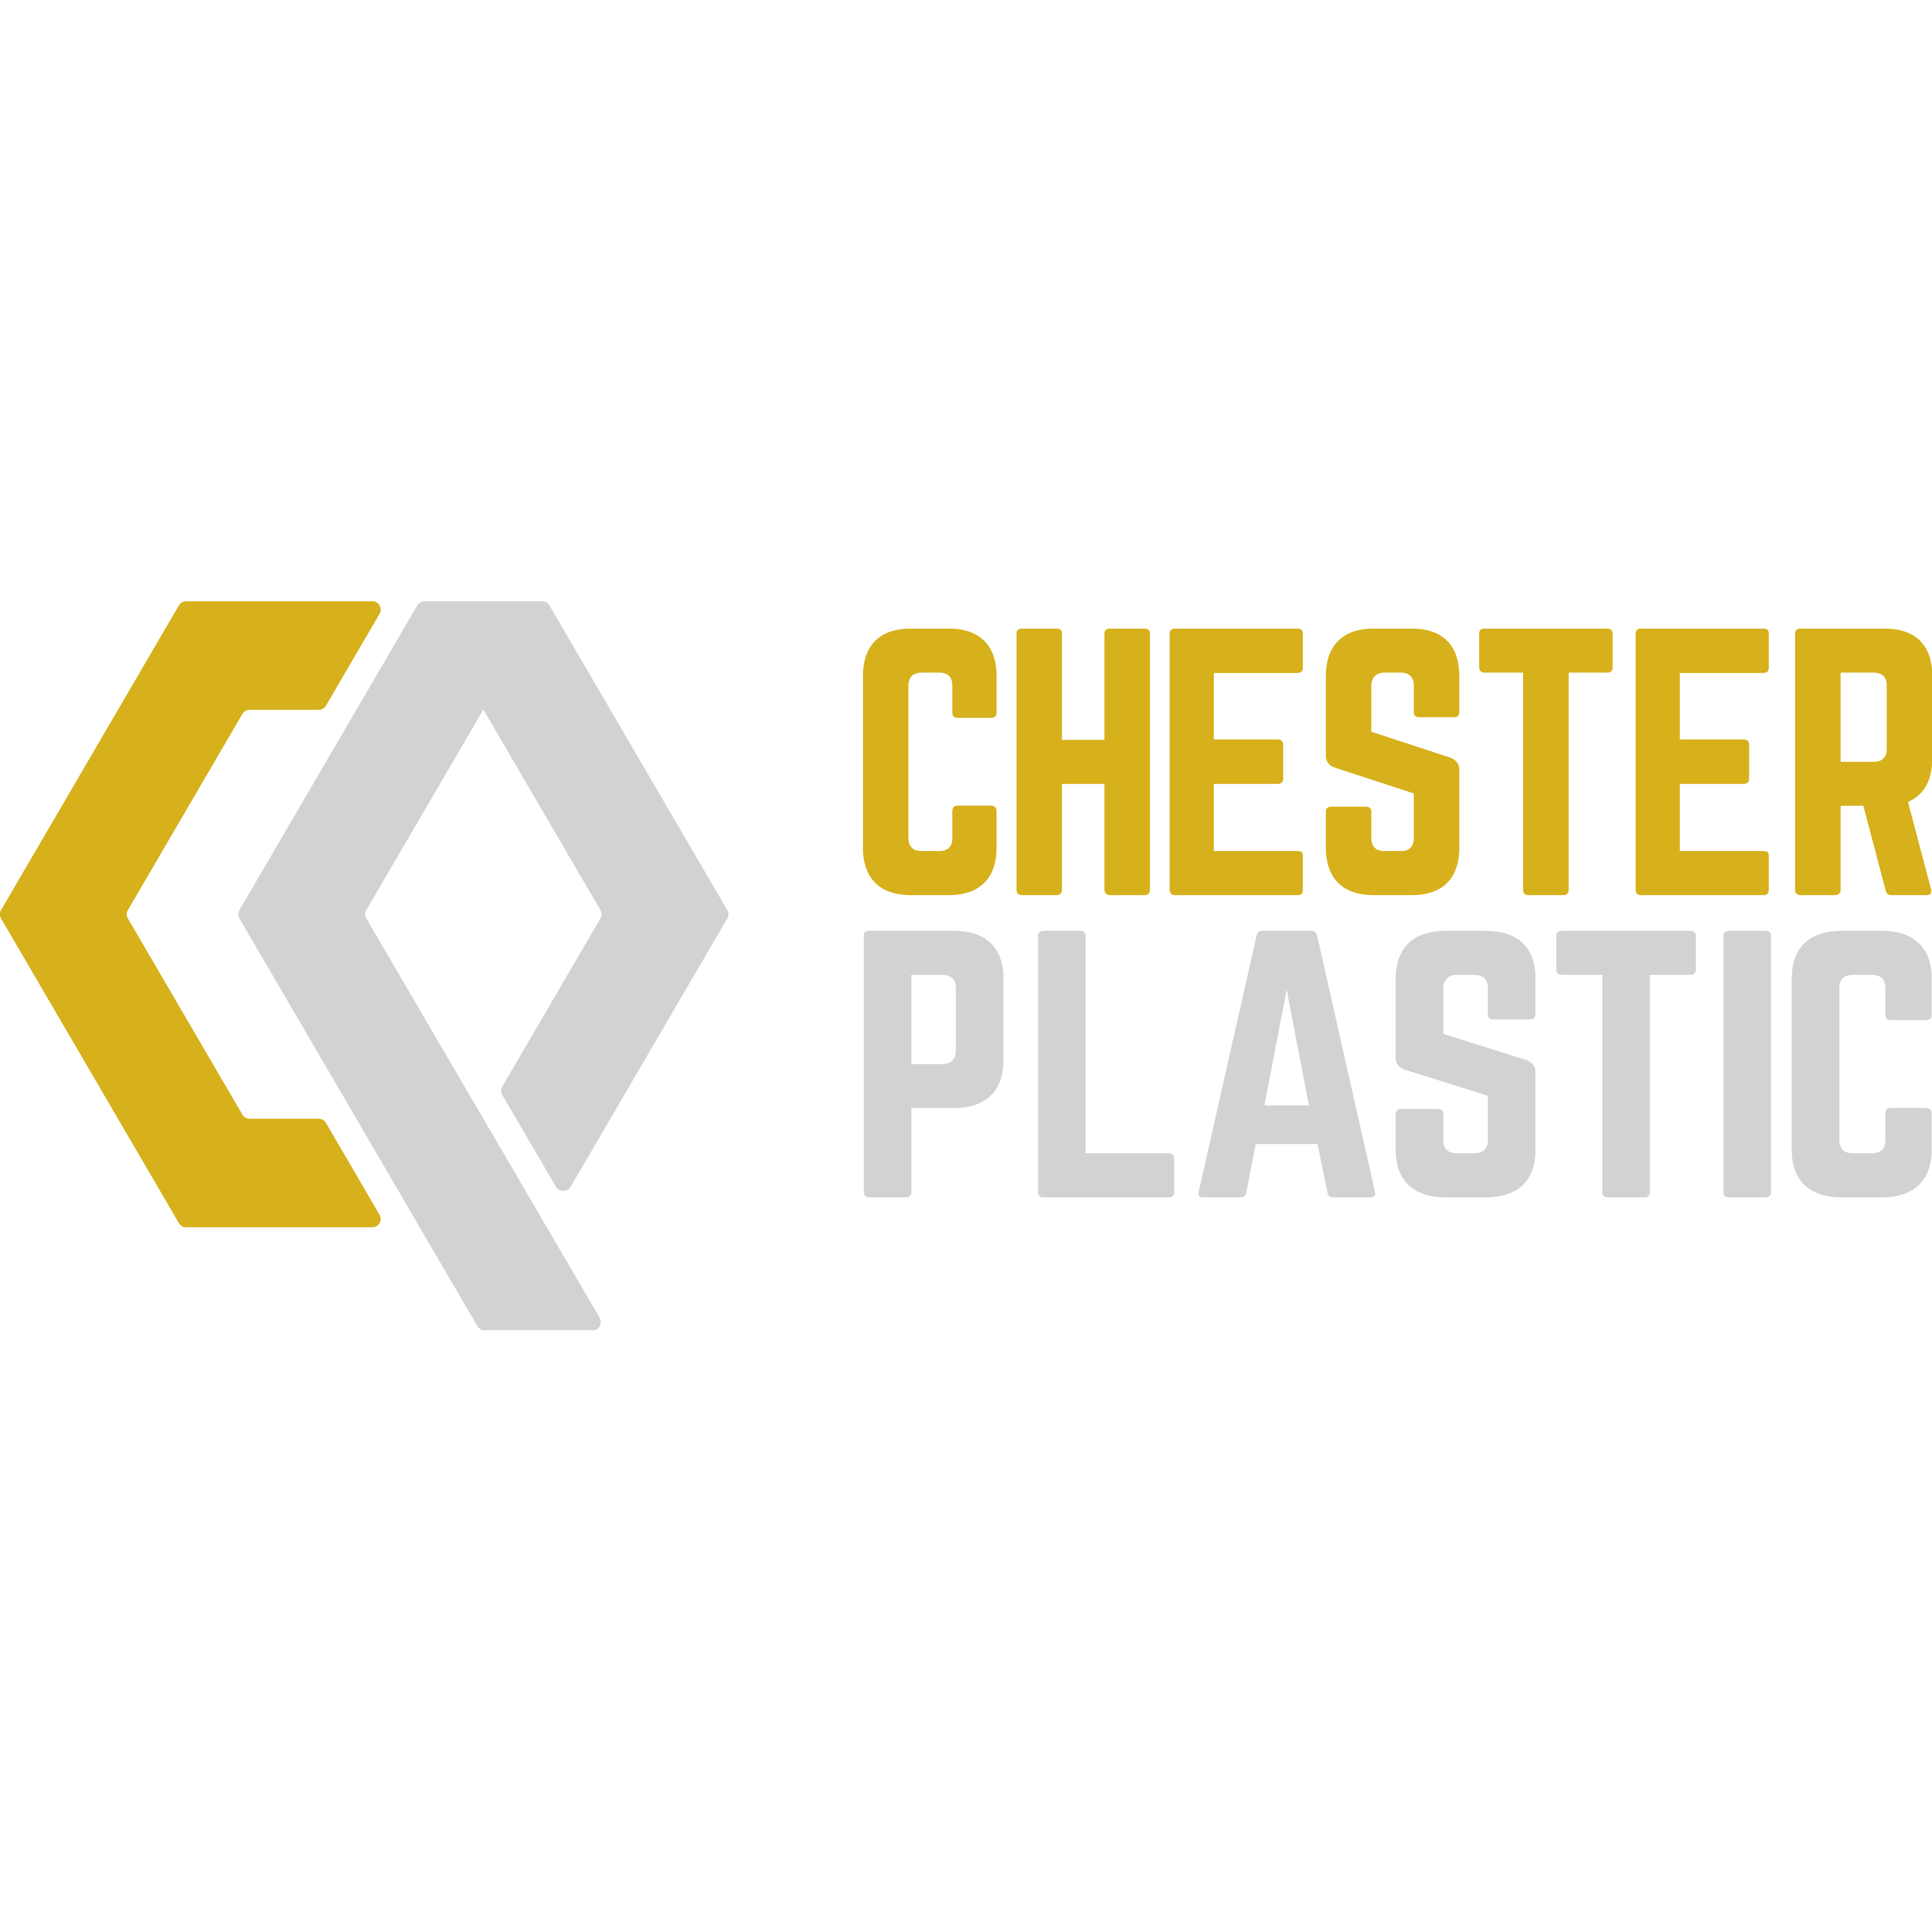 Chester Plastic & Paper Sales - Mountainville, NY 10953 - (845)534-3444 | ShowMeLocal.com